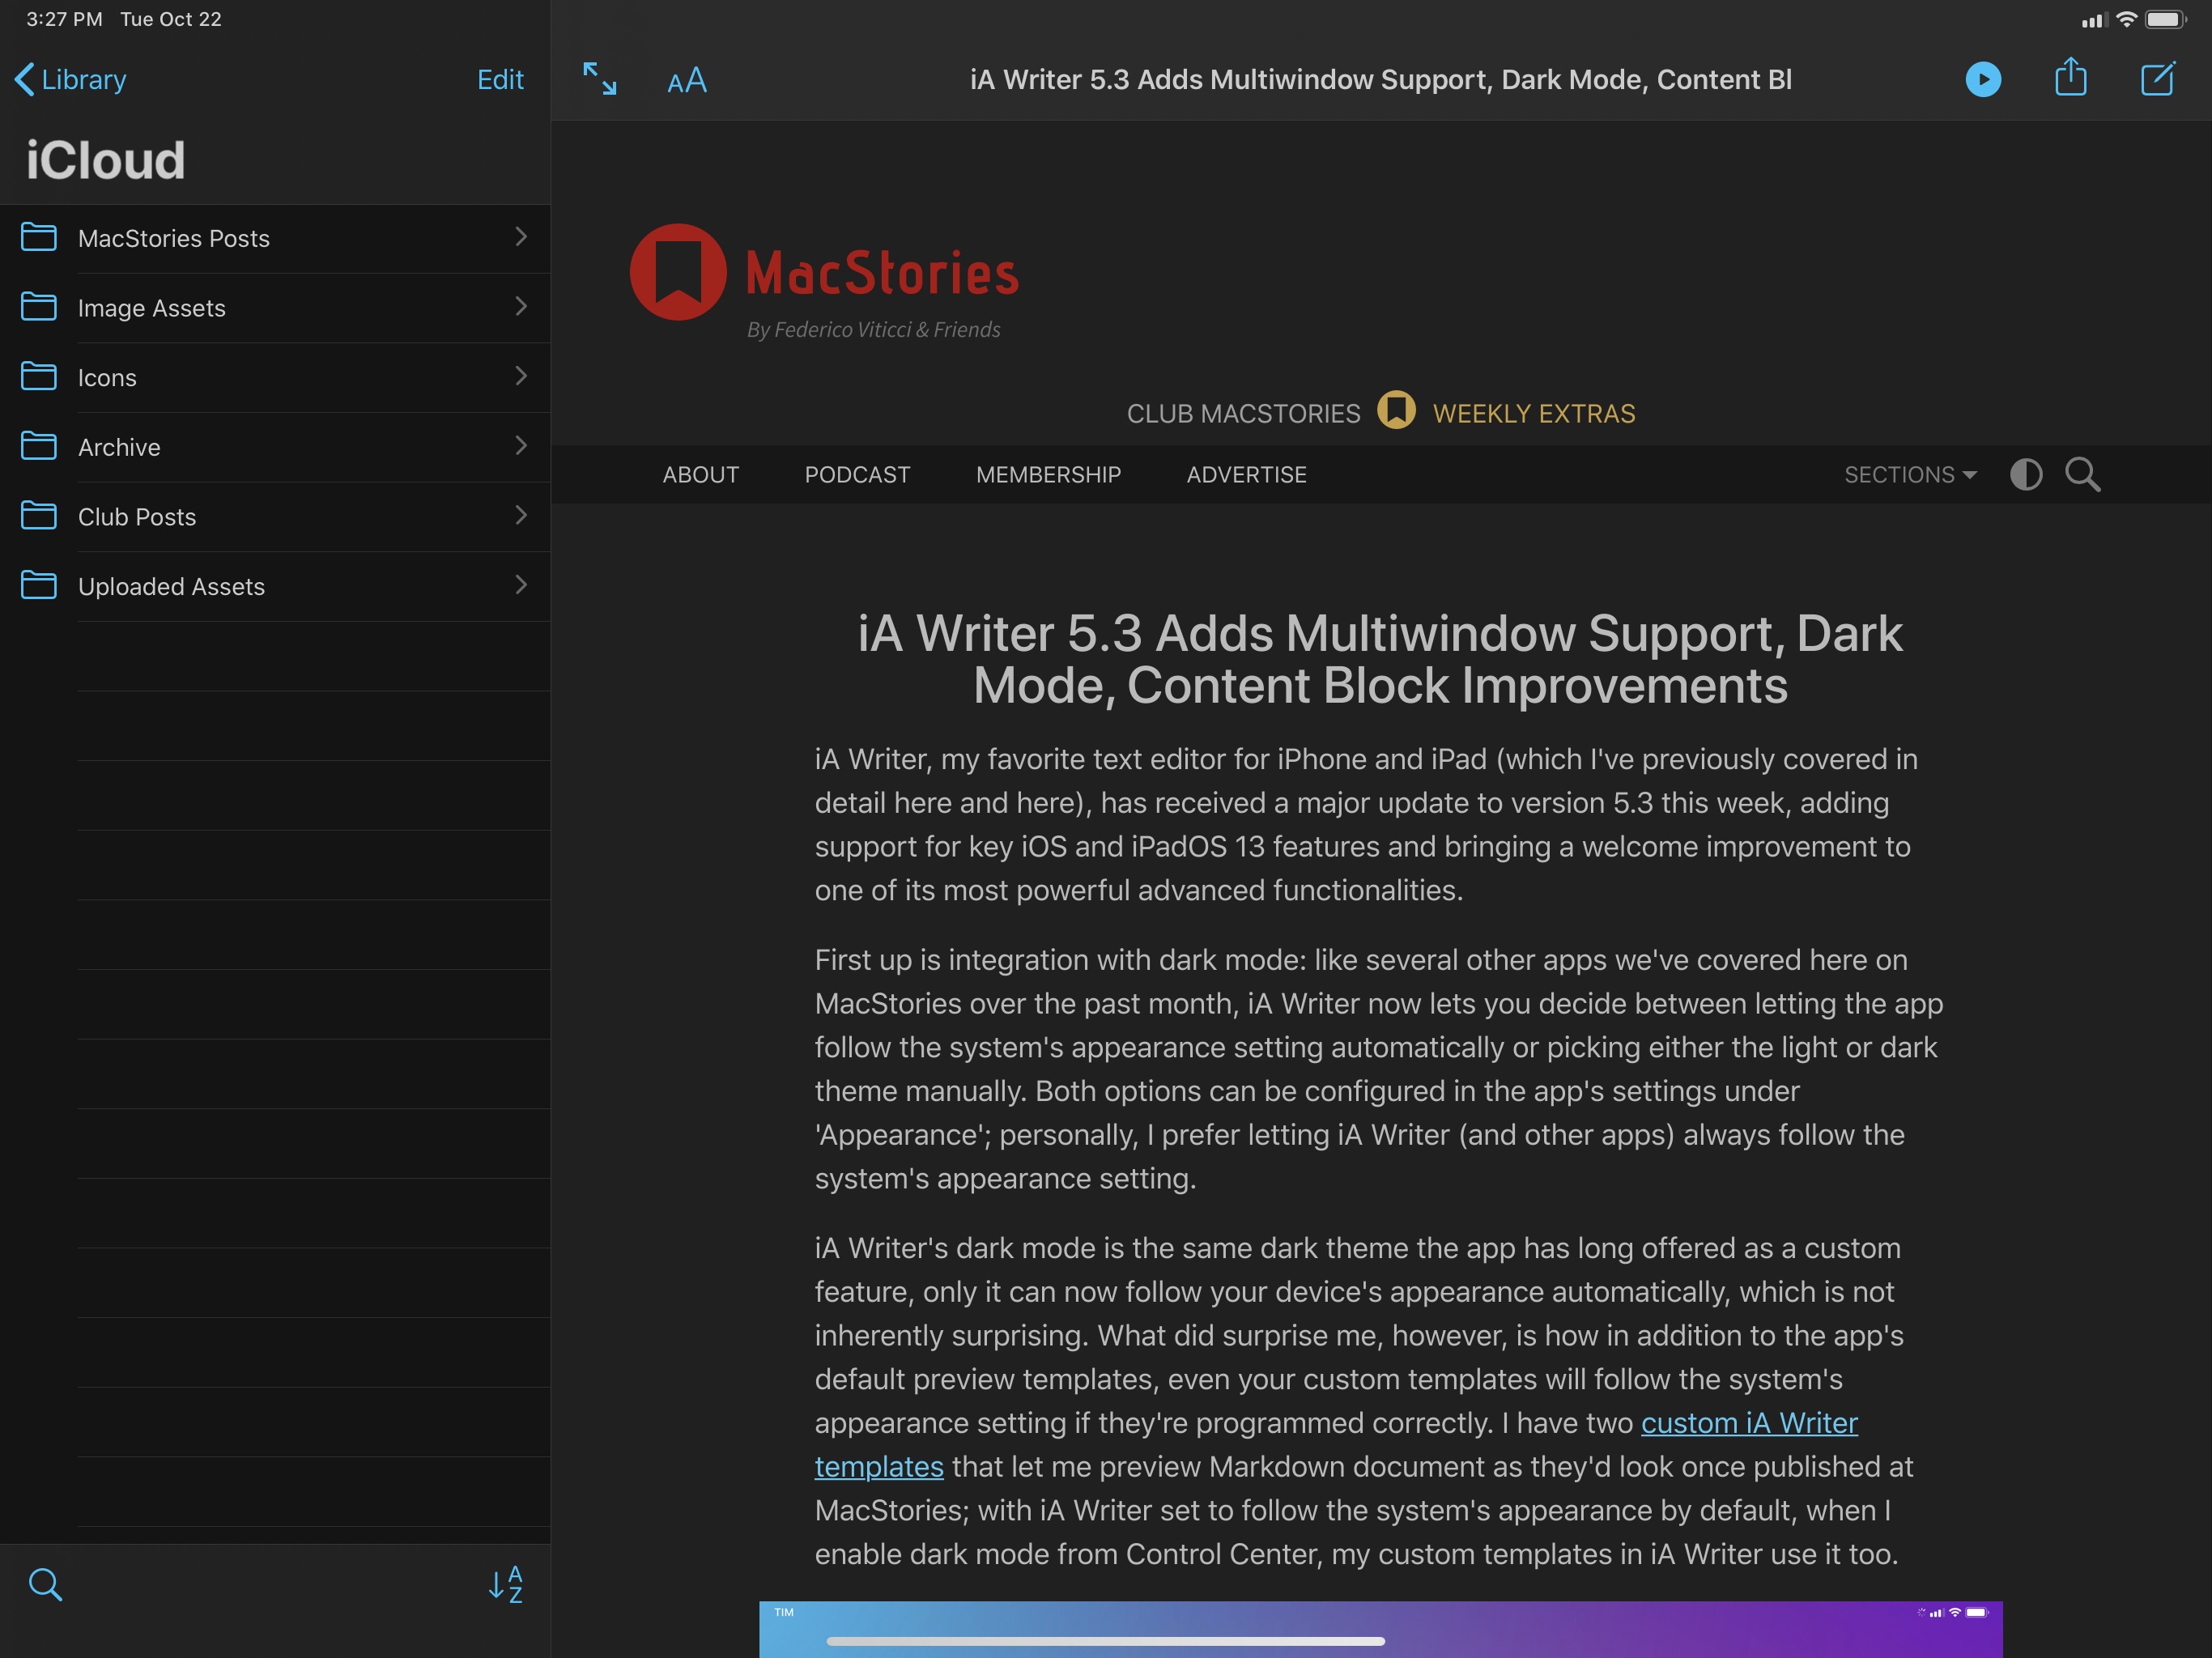 My custom MacStories template in iA Writer can switch to dark mode automatically alongside the rest of the app now.